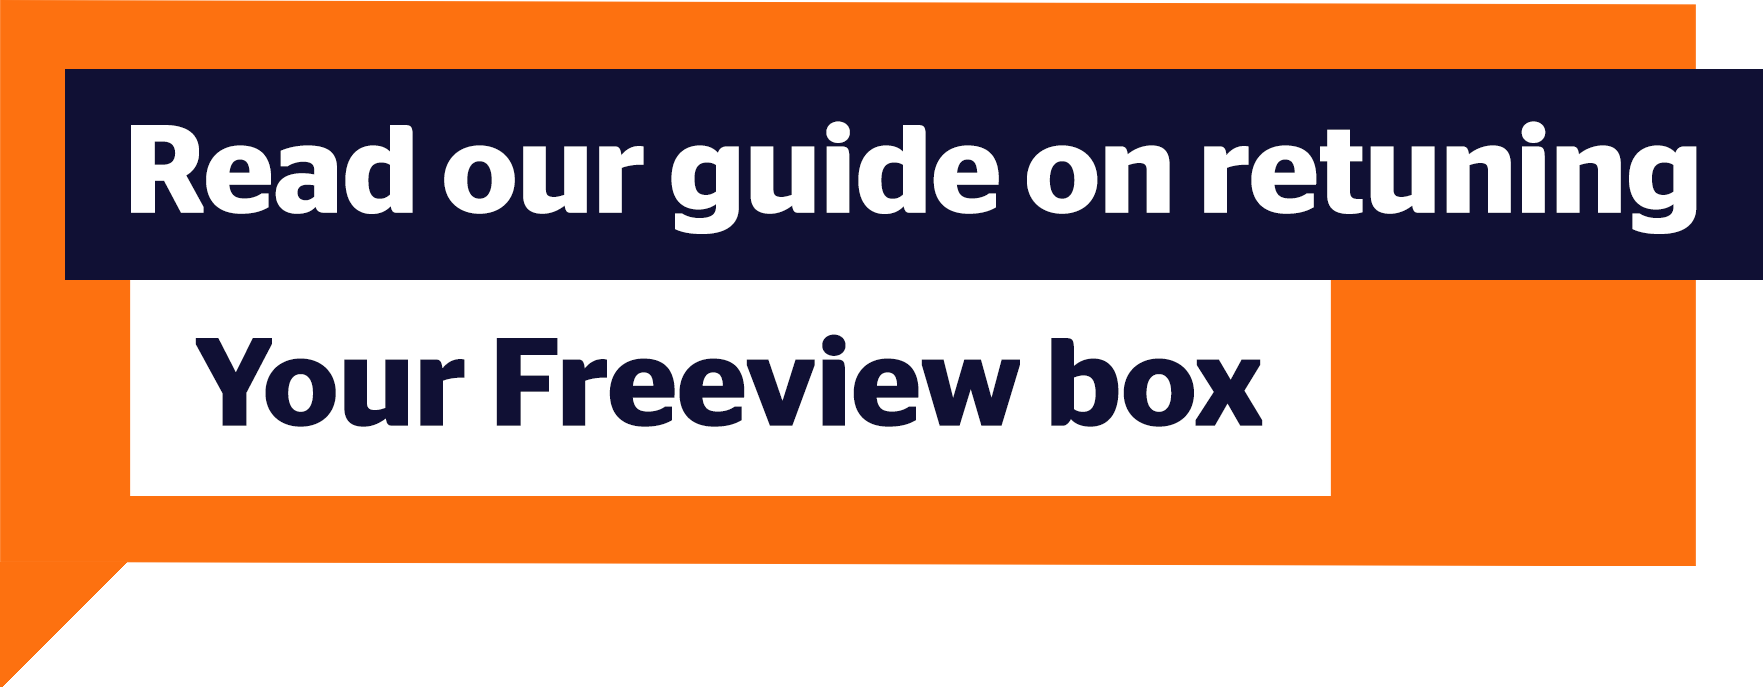 Retune your freeview box: https://www.togethertv.com/blog/important-update-freeview-viewers-changes-together-tv-coverage-29th-june-2022